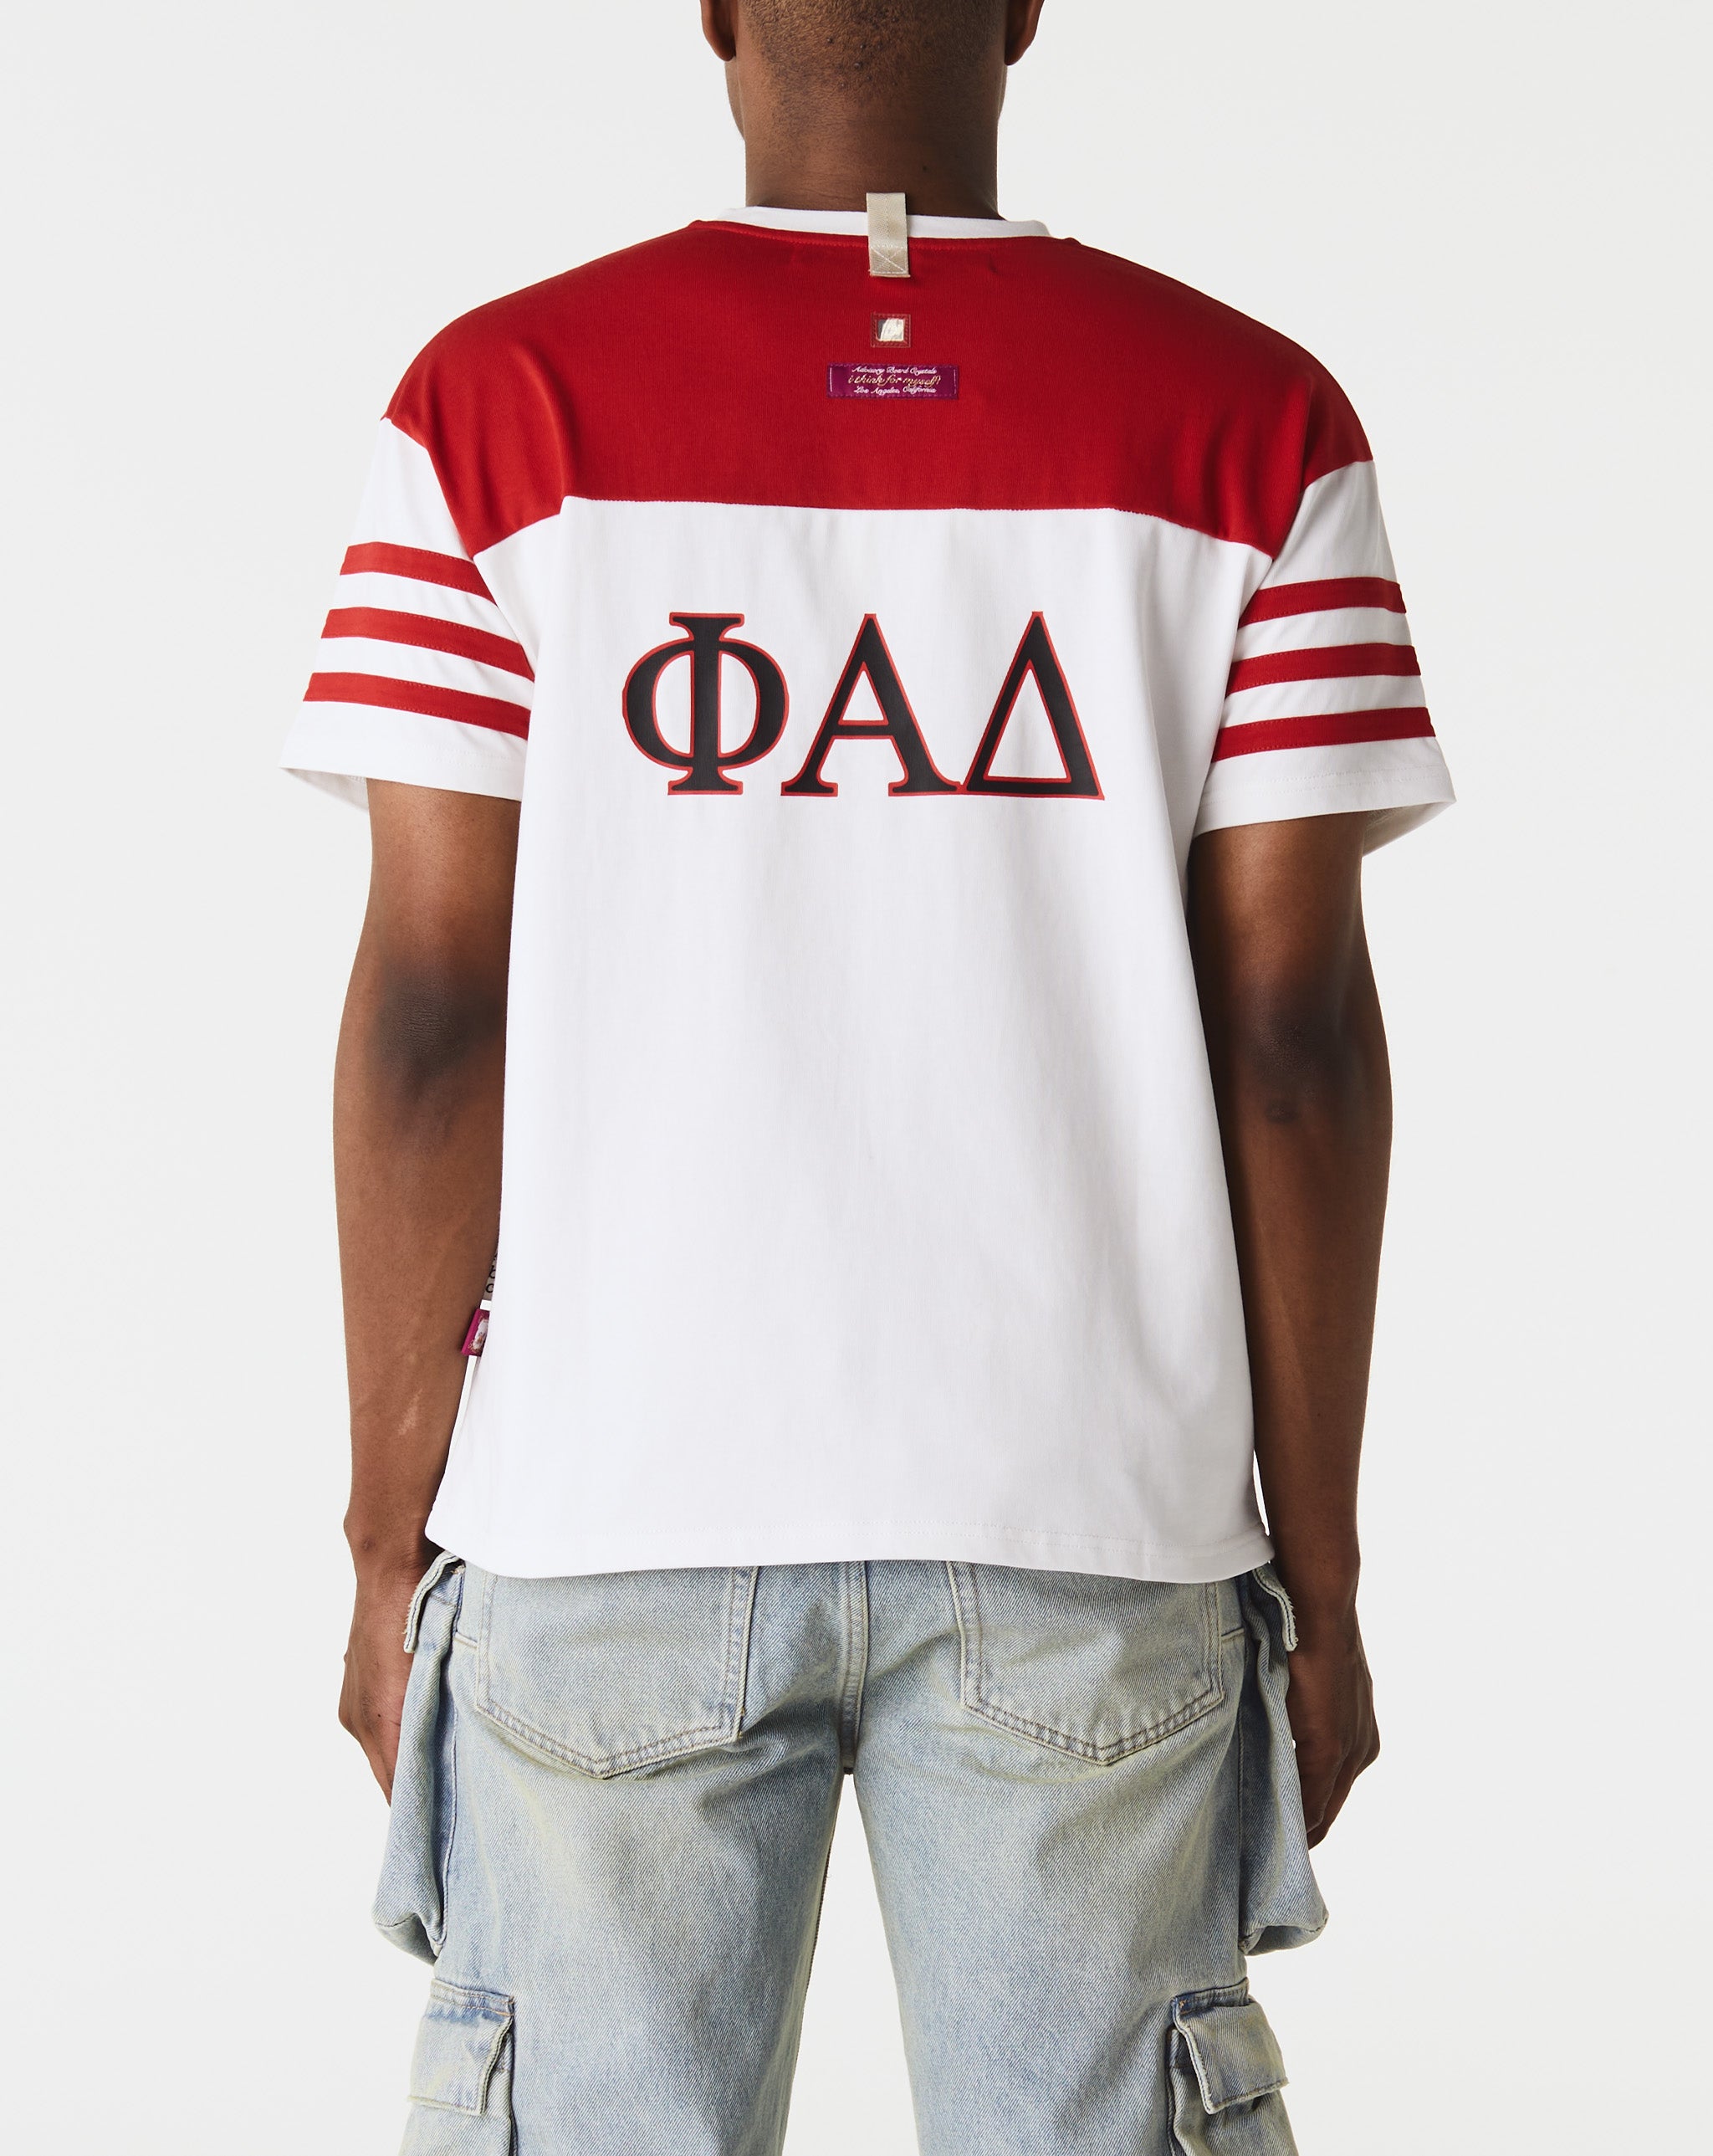 I agree with the Fraternity T-Shirt  - Cheap Urlfreeze Jordan outlet